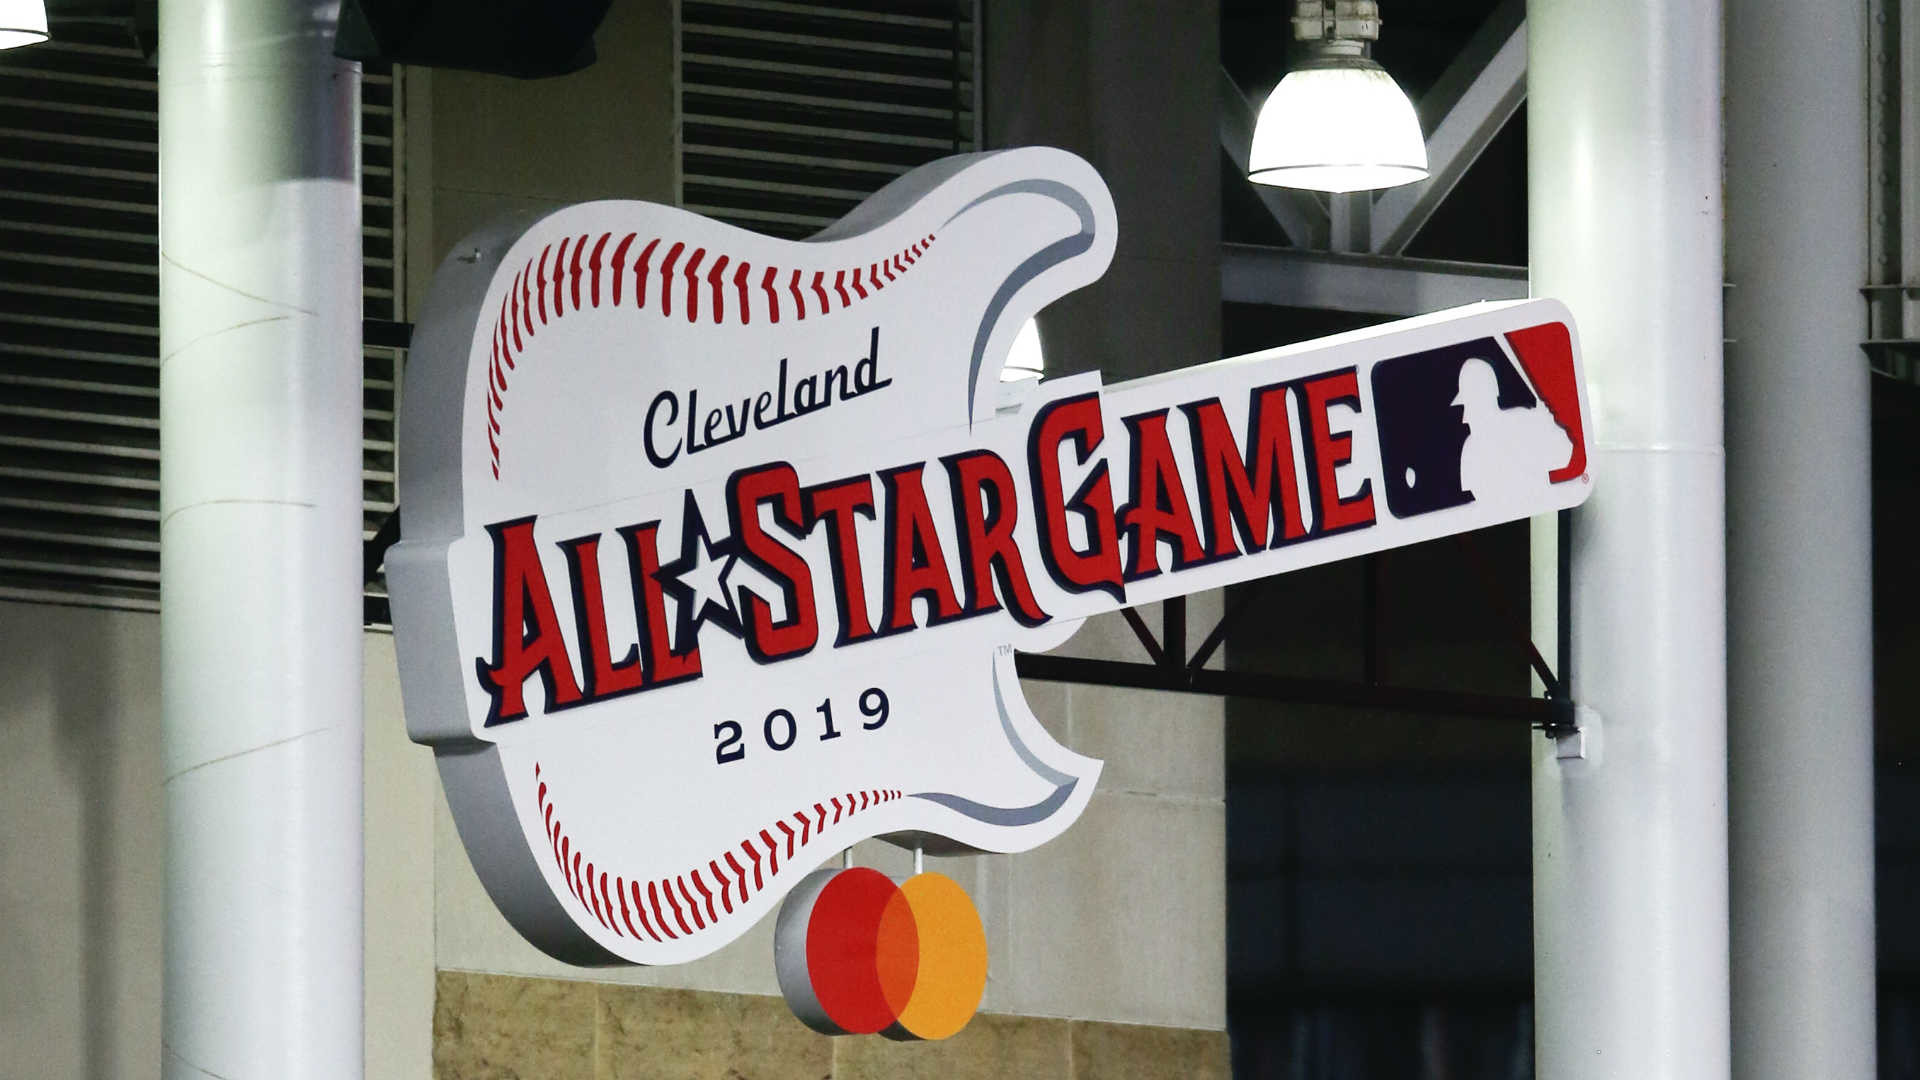 1920x1080 MLB All-Star 'Election Day' part of new voting proposal, report says